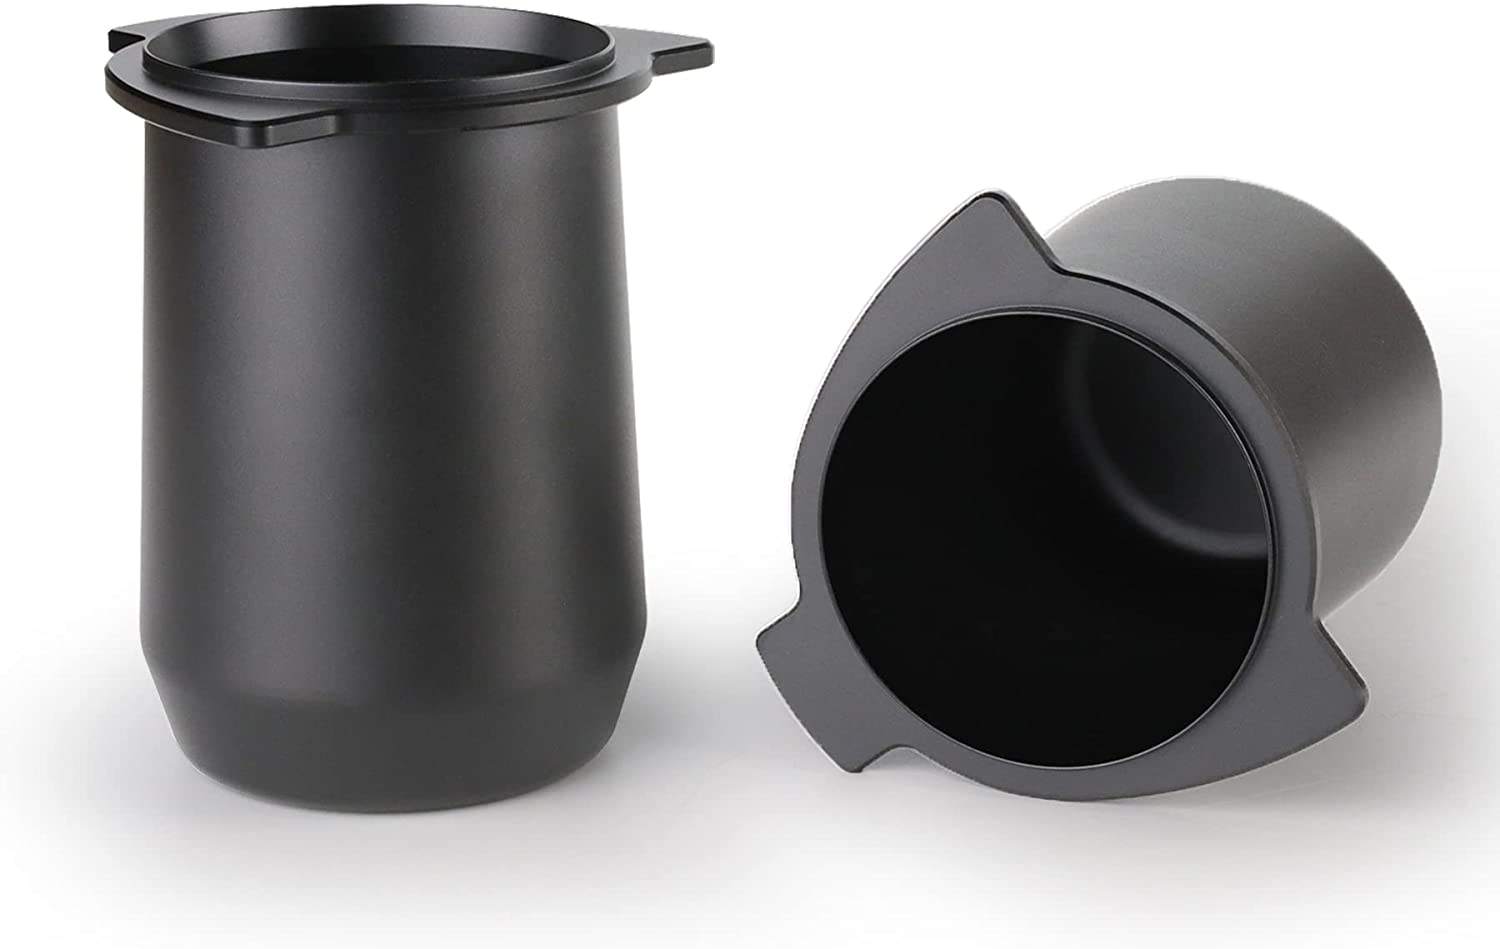 58mm Portafilter Dosing Cup Espresso Coffee Dosing Cup 304 Stainless Steel Matte Black Non-stick Coating